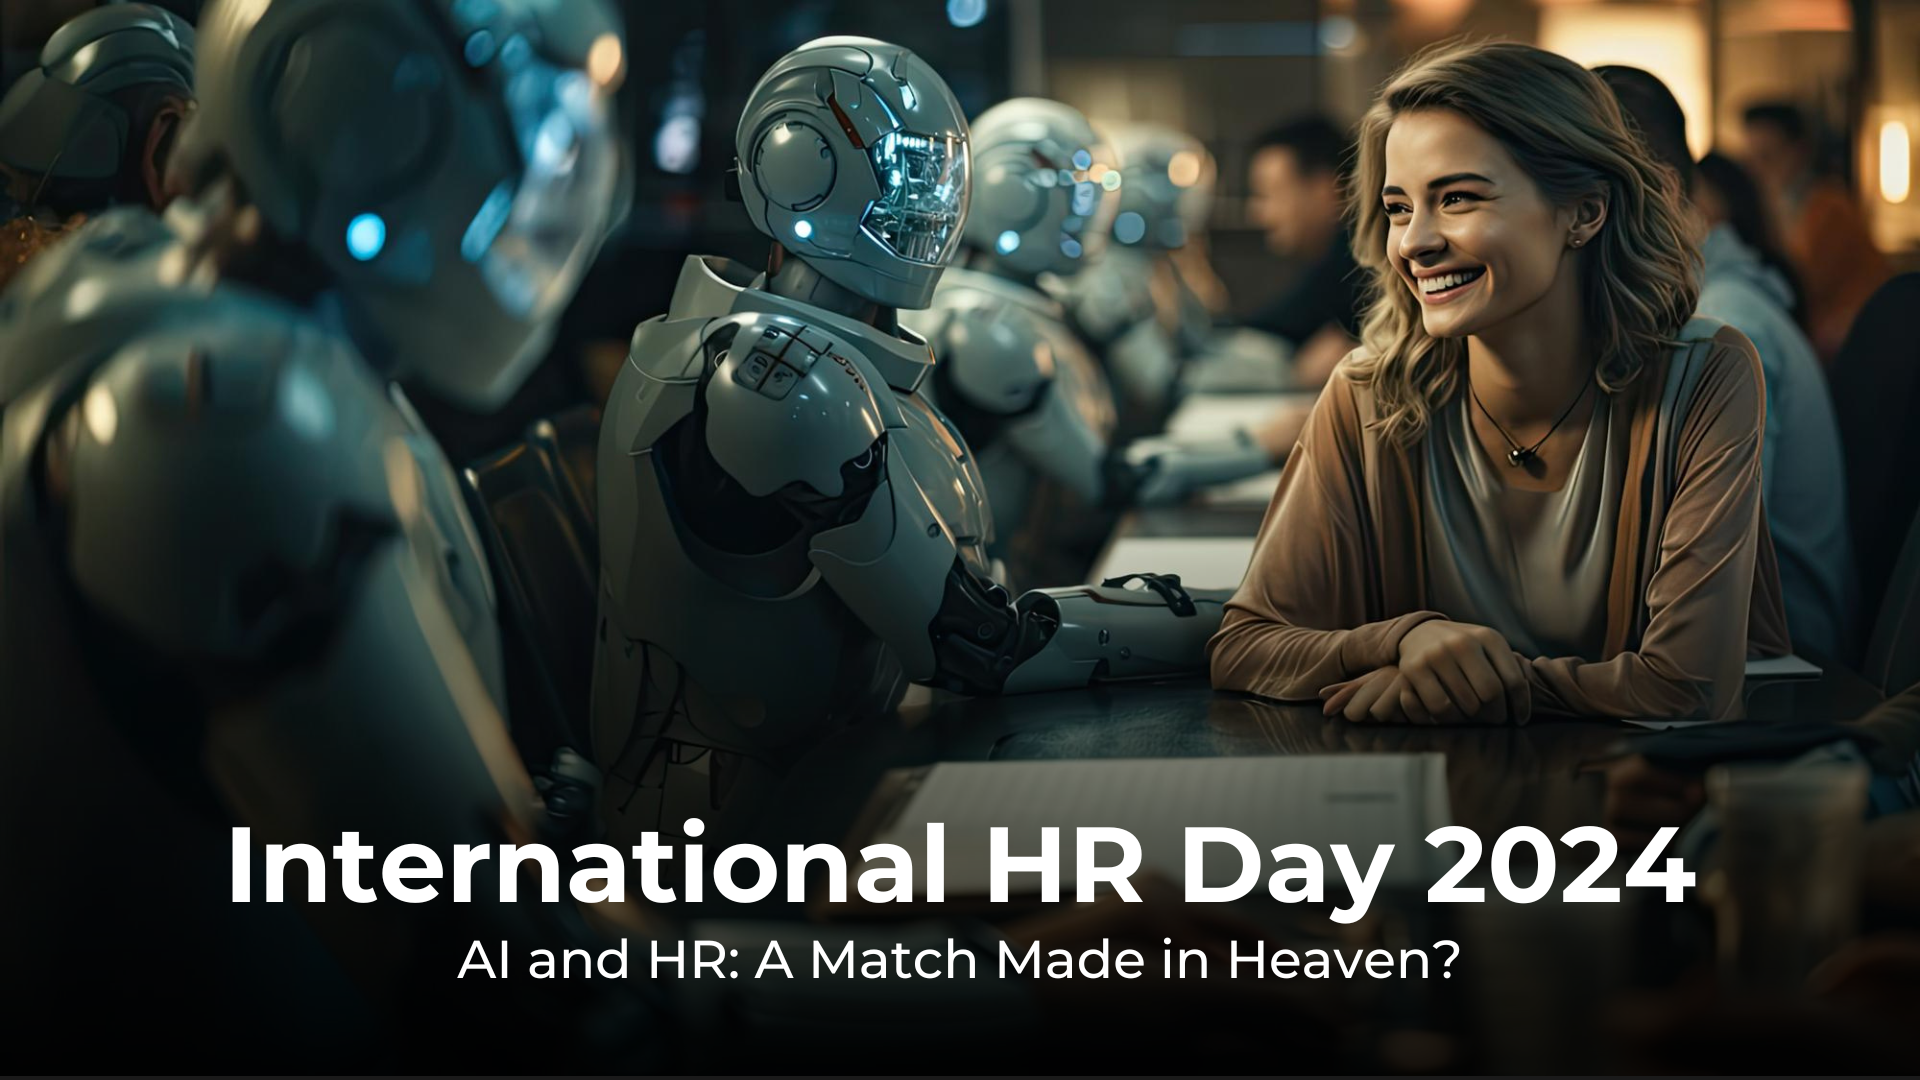 HR and AI, a match made in heaven